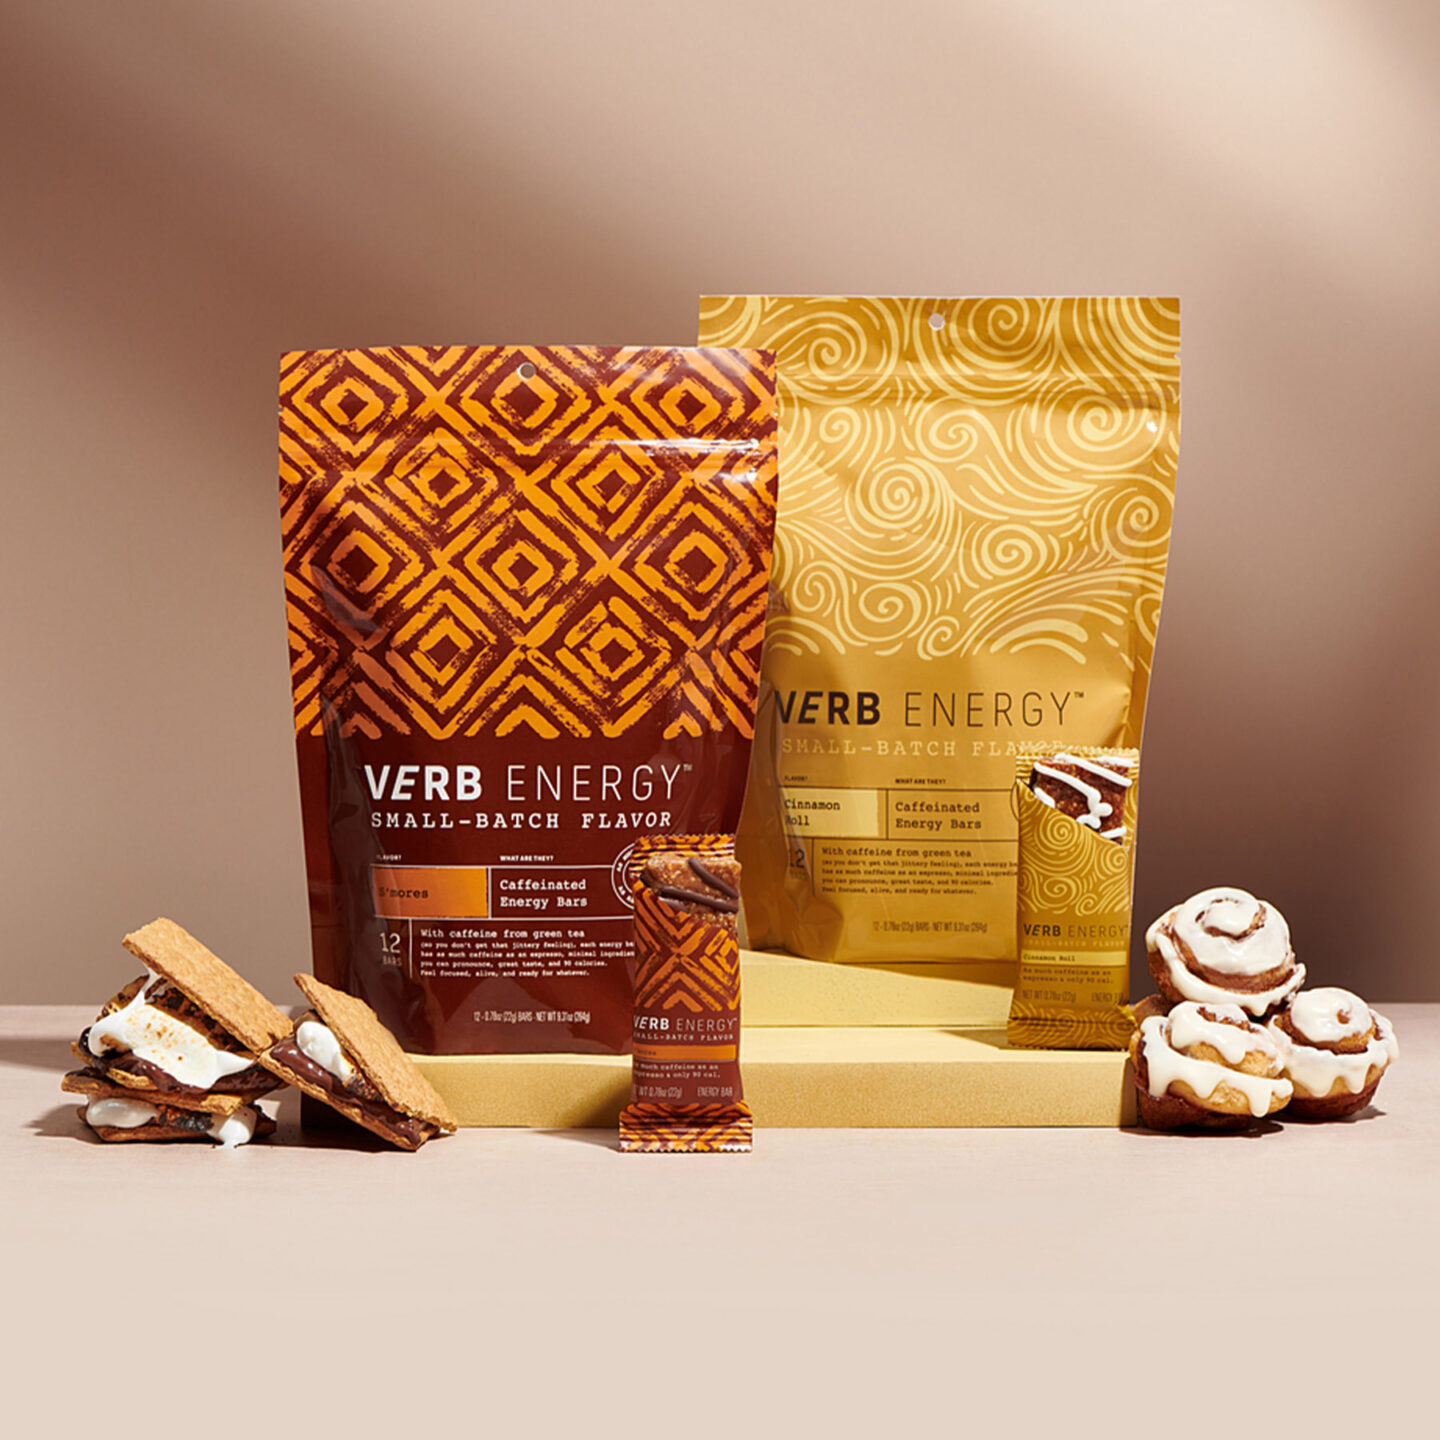 Verb Energy Bars - S'mores and Cinnamon Roll flavors. #energybars